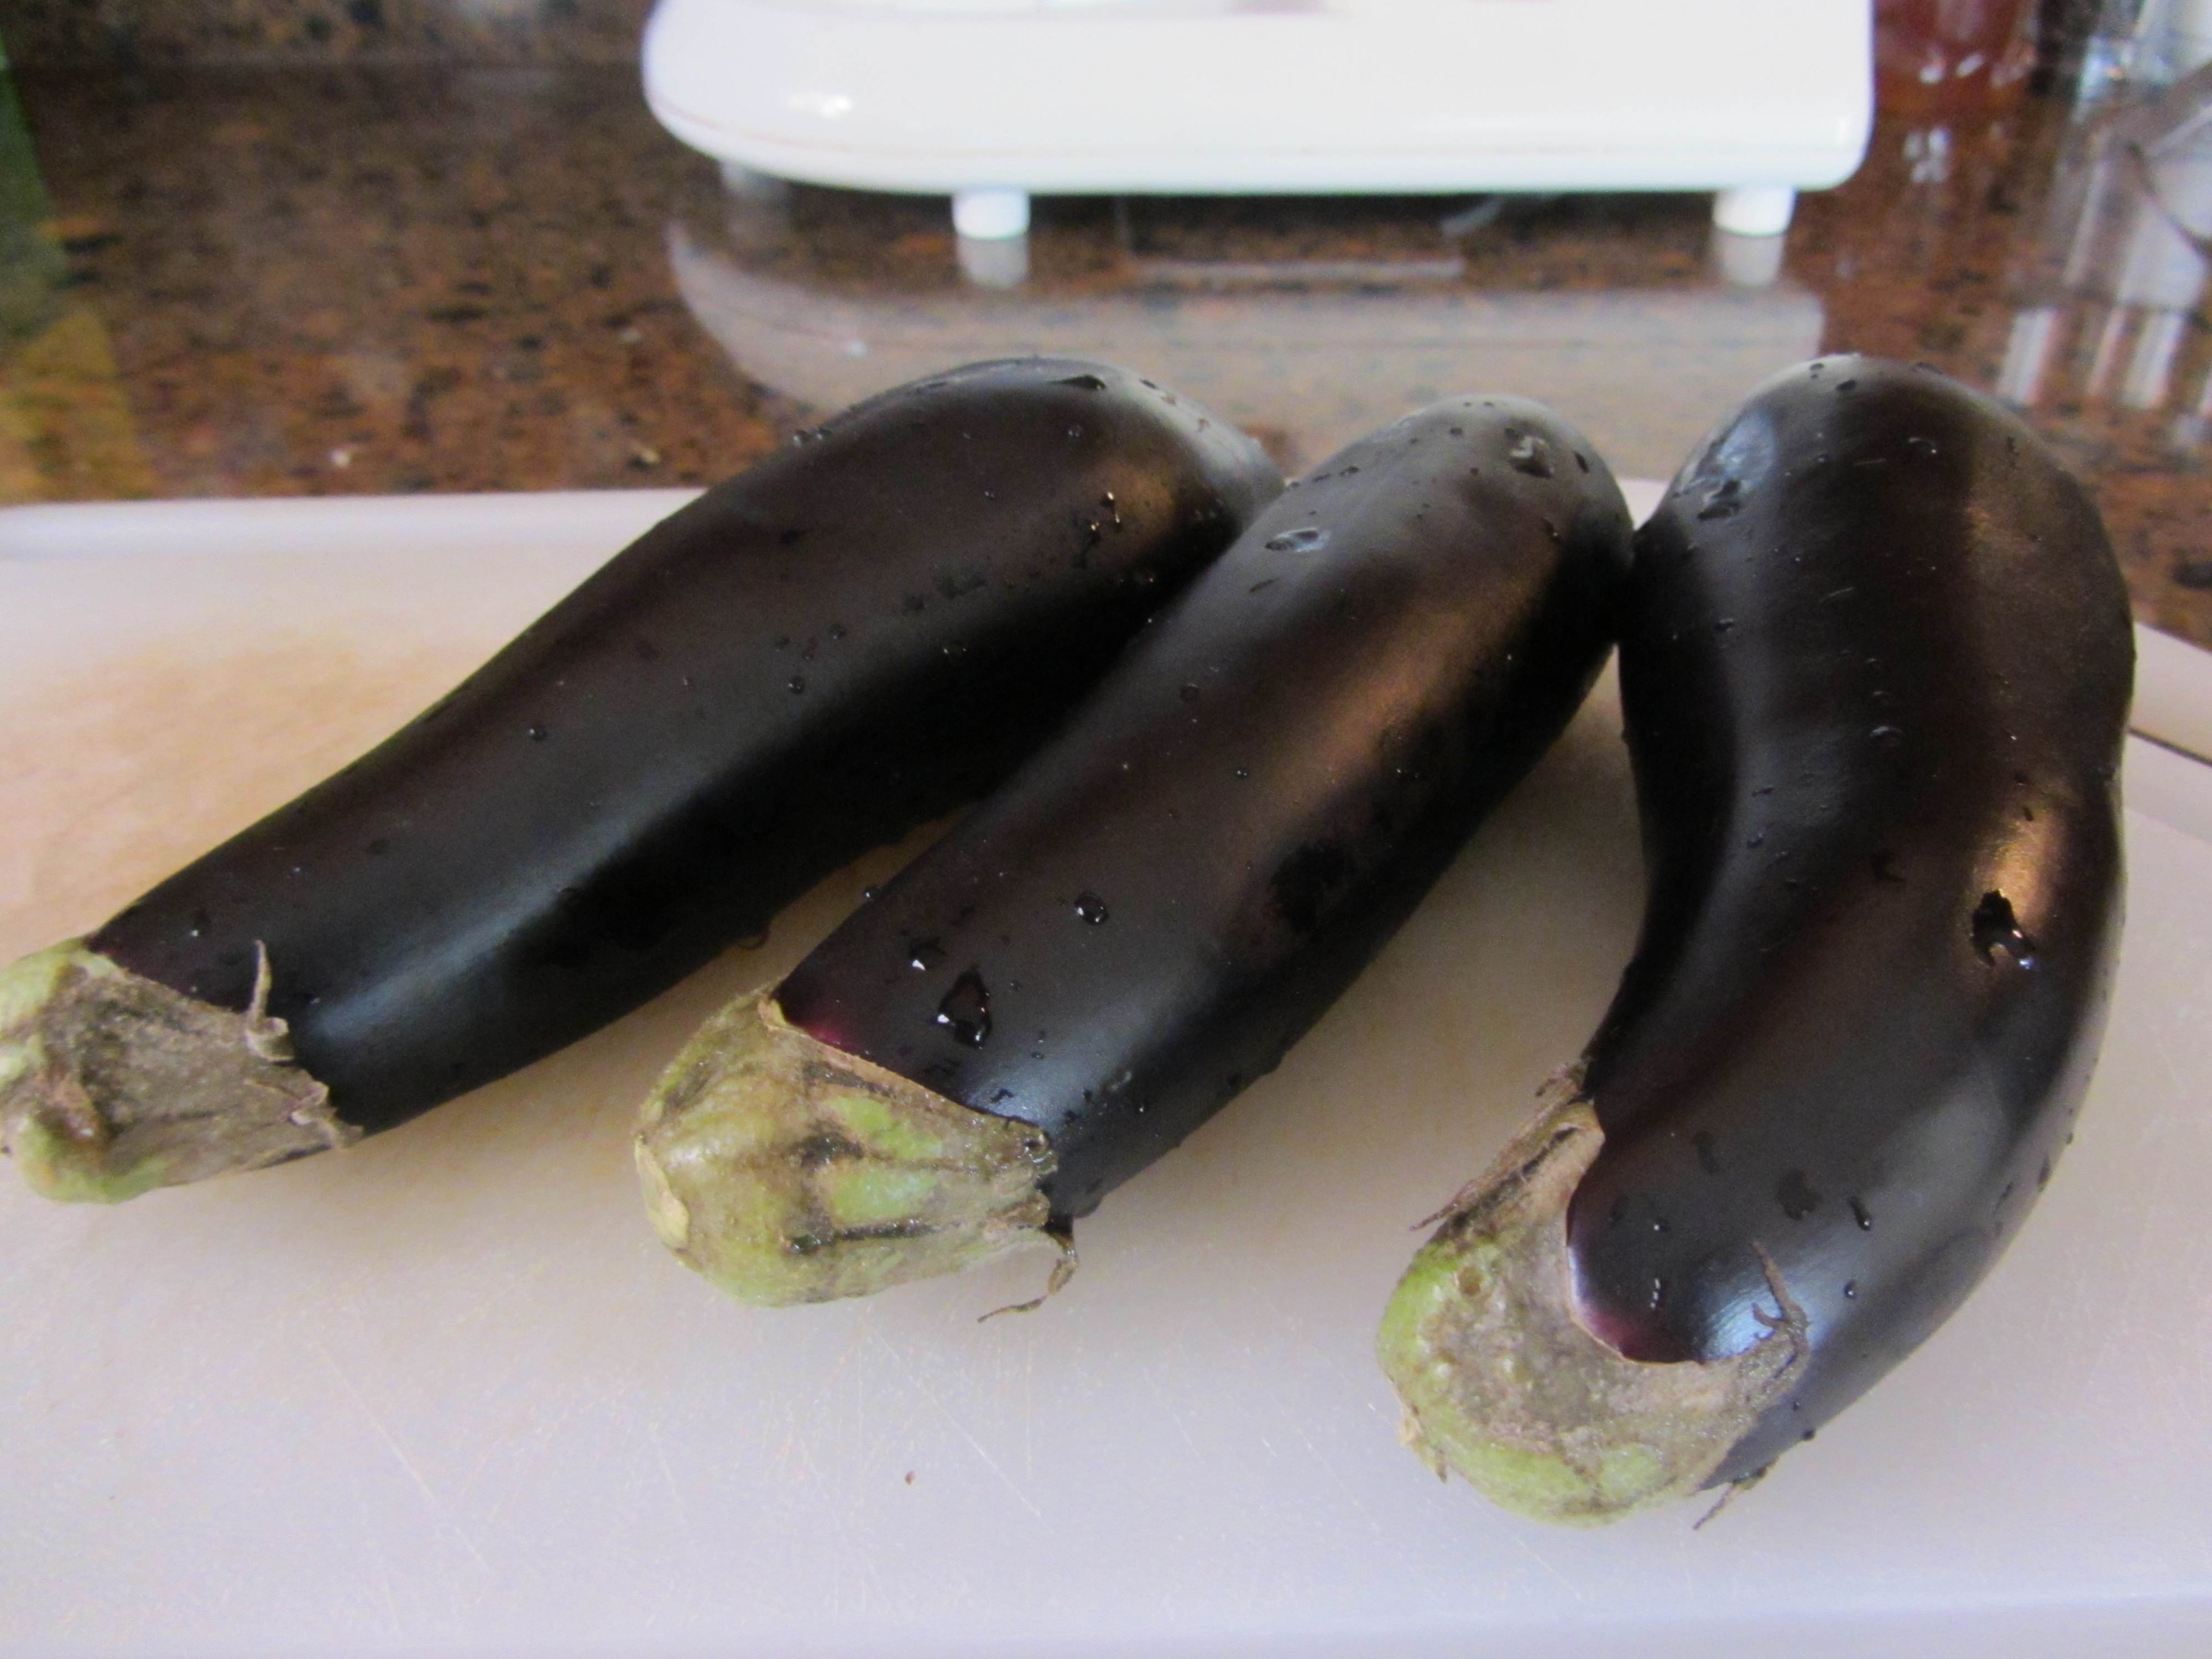 What is a simple recipe for eggplant casserole?